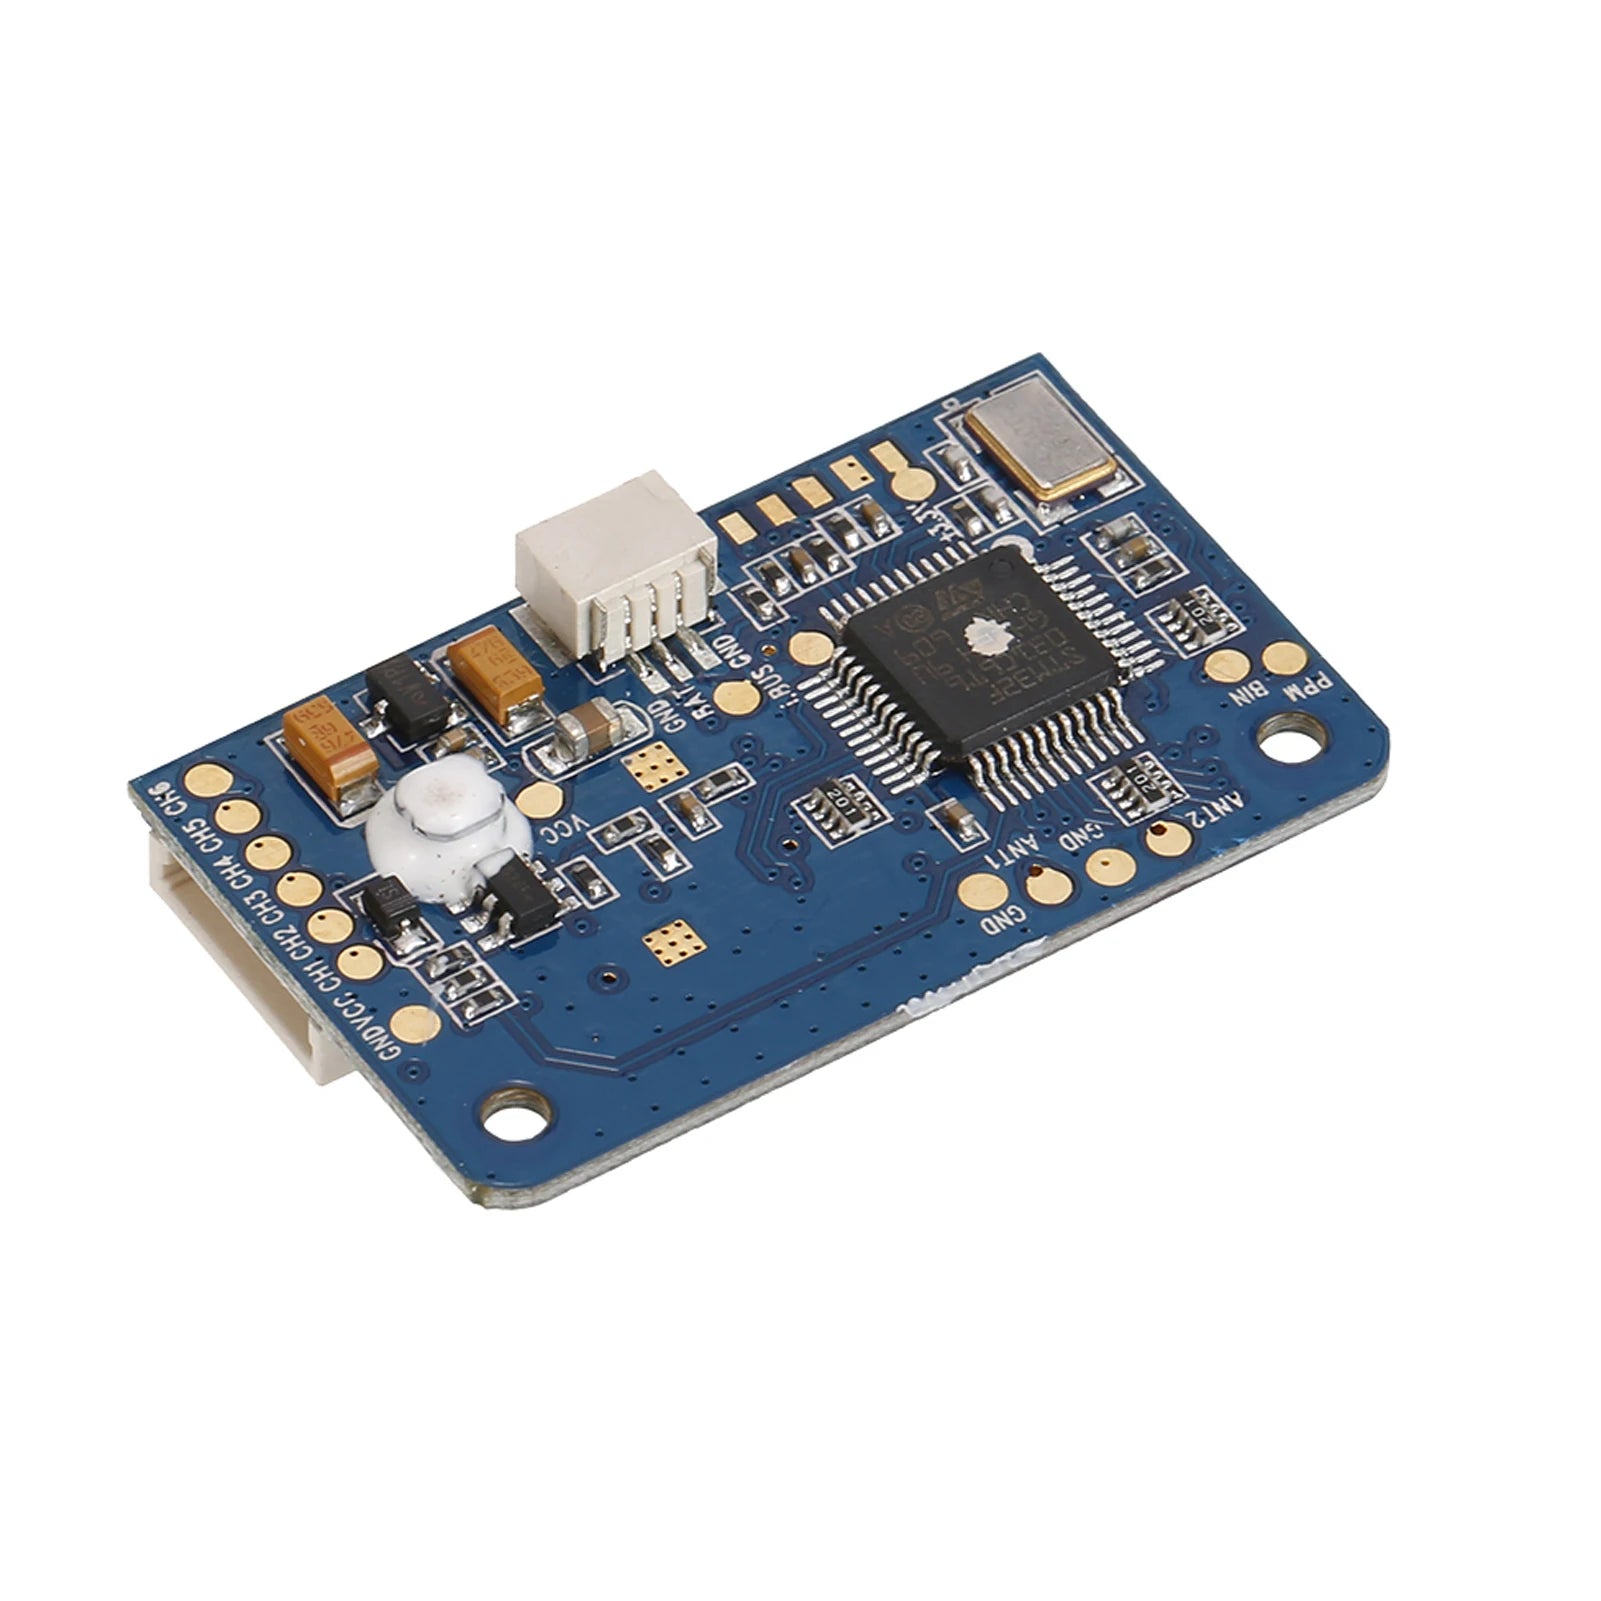 FlySky FS-X6B 2.4G 6CH Receiver, the size and mounting hole make it perfectly fit with CC3D, F3, and F